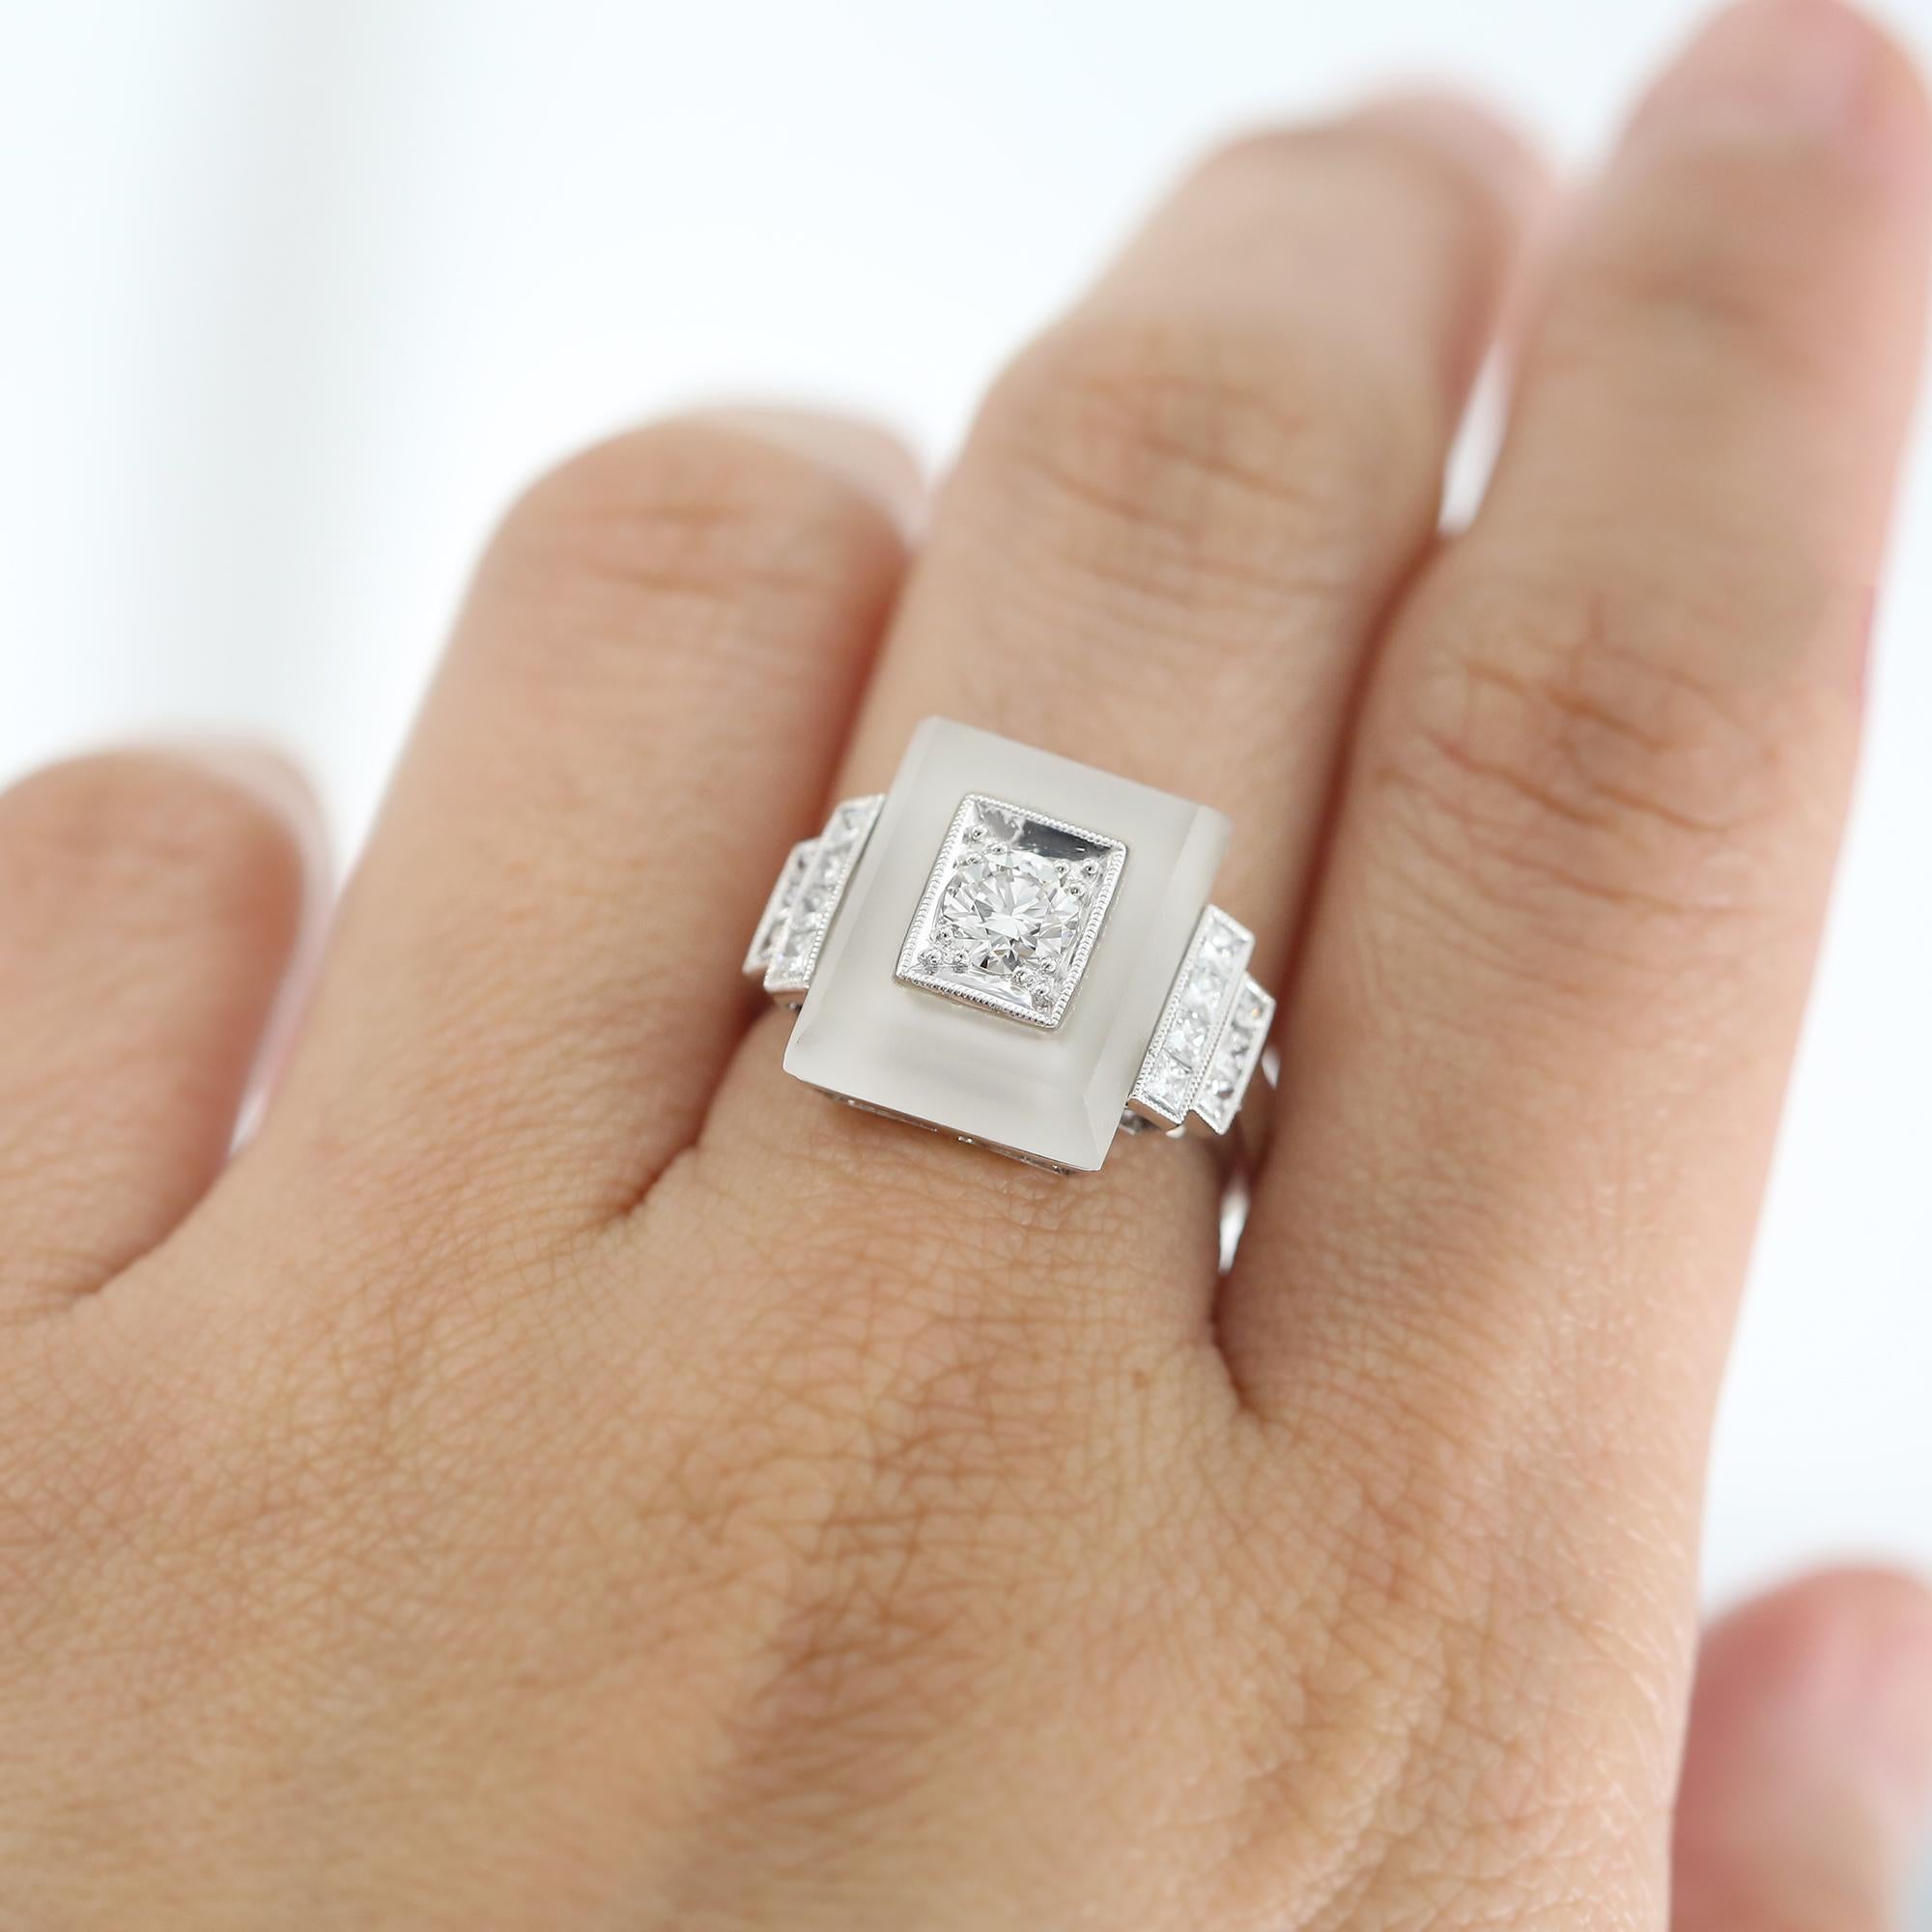 Savoir-faire white quartz and diamond ring. This exceptional ring features a mix of round brilliant cut and princess cut diamonds in this intricate, stepped design. Metal is 18ct white gold. 

Quartz: white crystal = 4.32ct.

Diamonds: Round